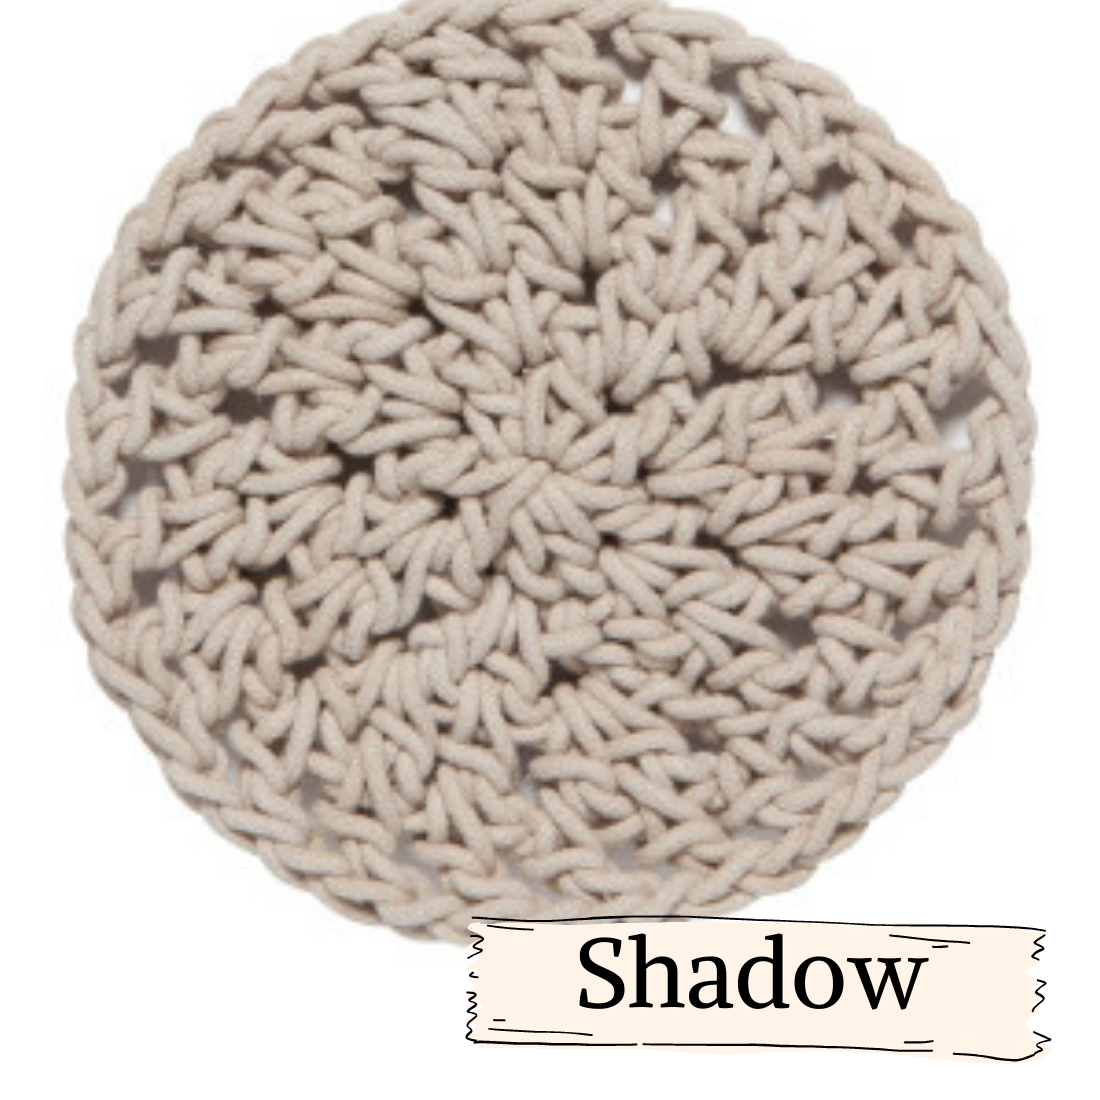 Round knotted trivet neutral colors for hot pans, dishes tablesettings